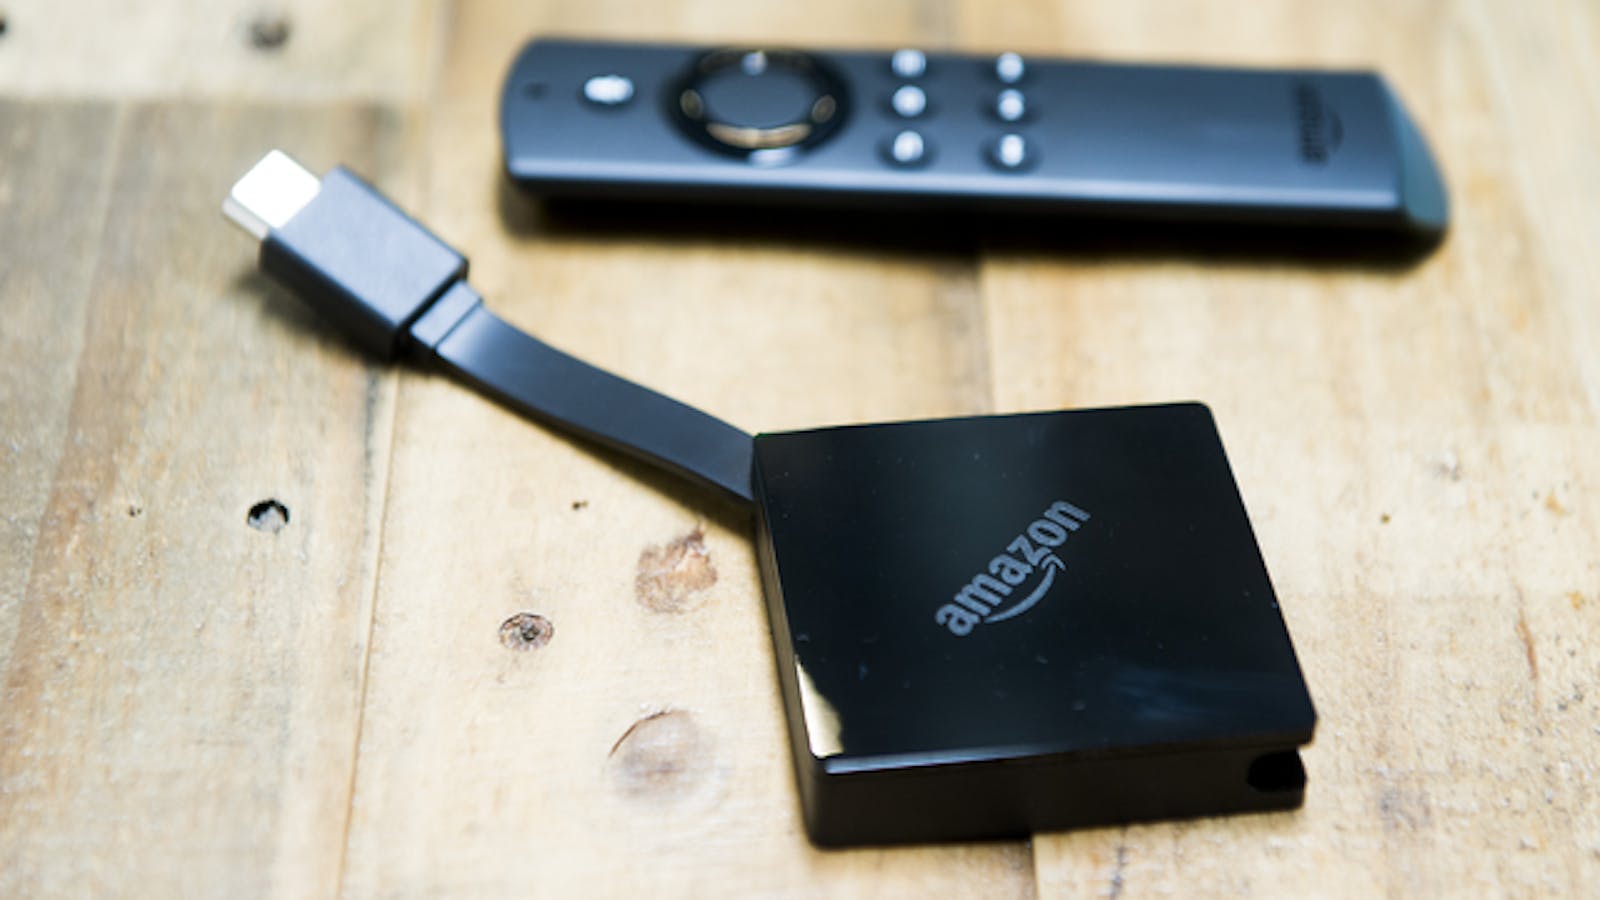 Amazon's latest Fire Stick TV devices introduced last year. Photo by Bloomberg